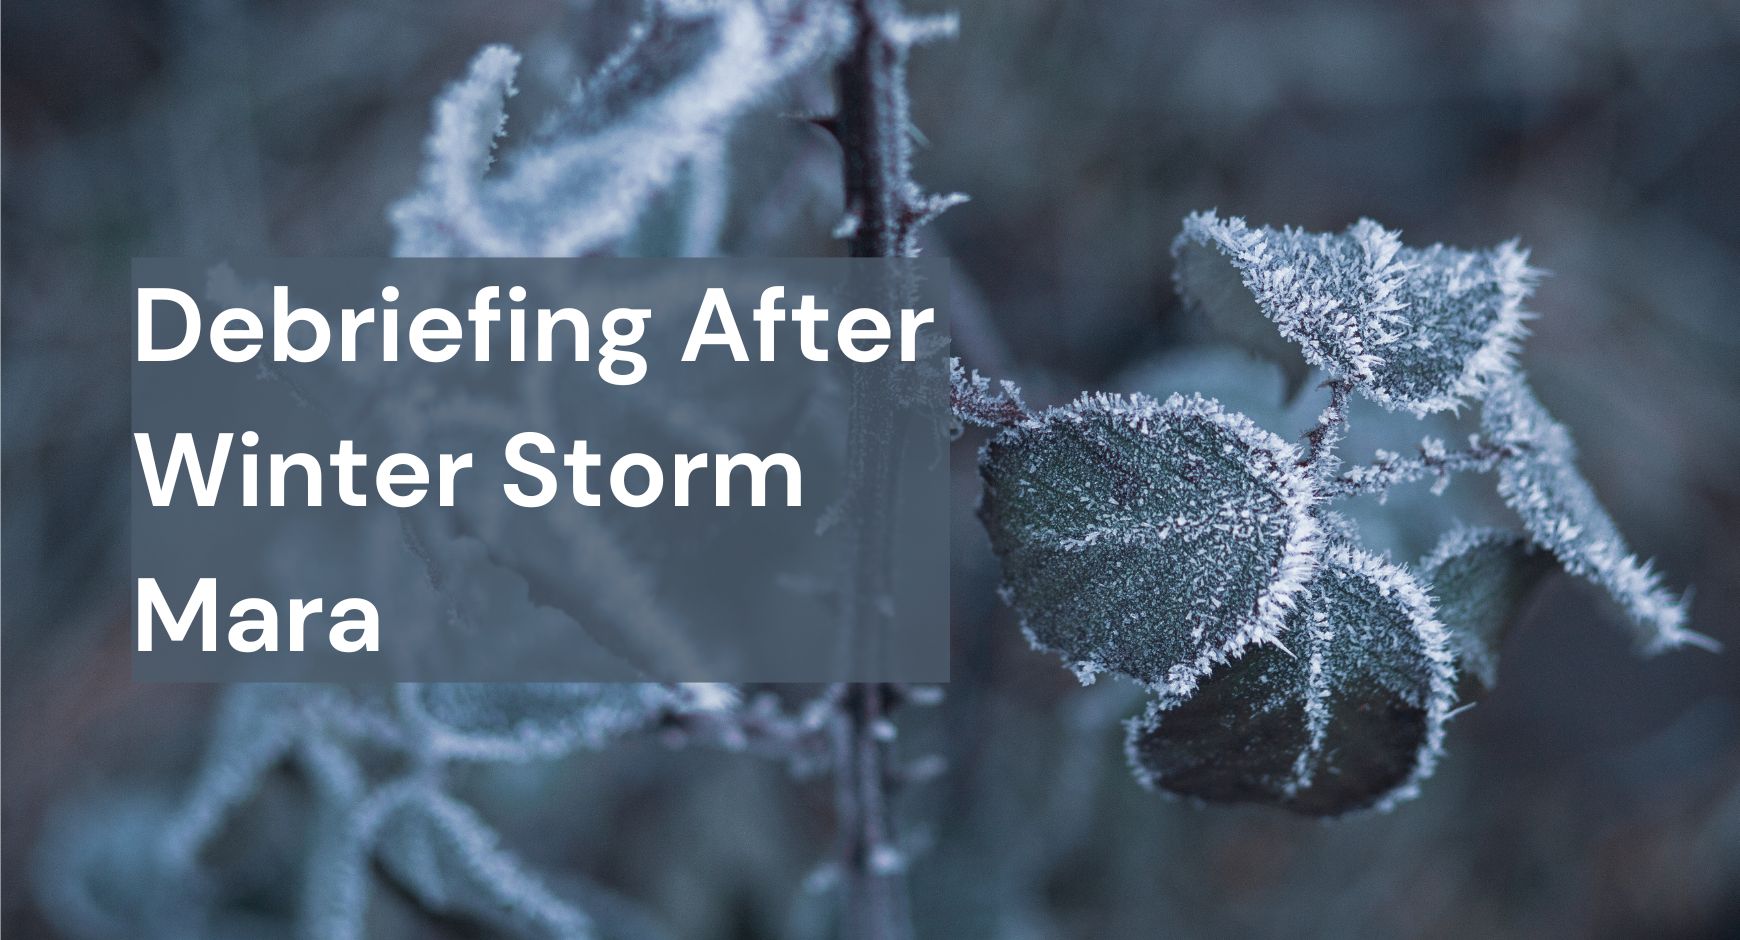 A frozen branch and leaf under words that read "Debriefing After Winter Storm Mara"